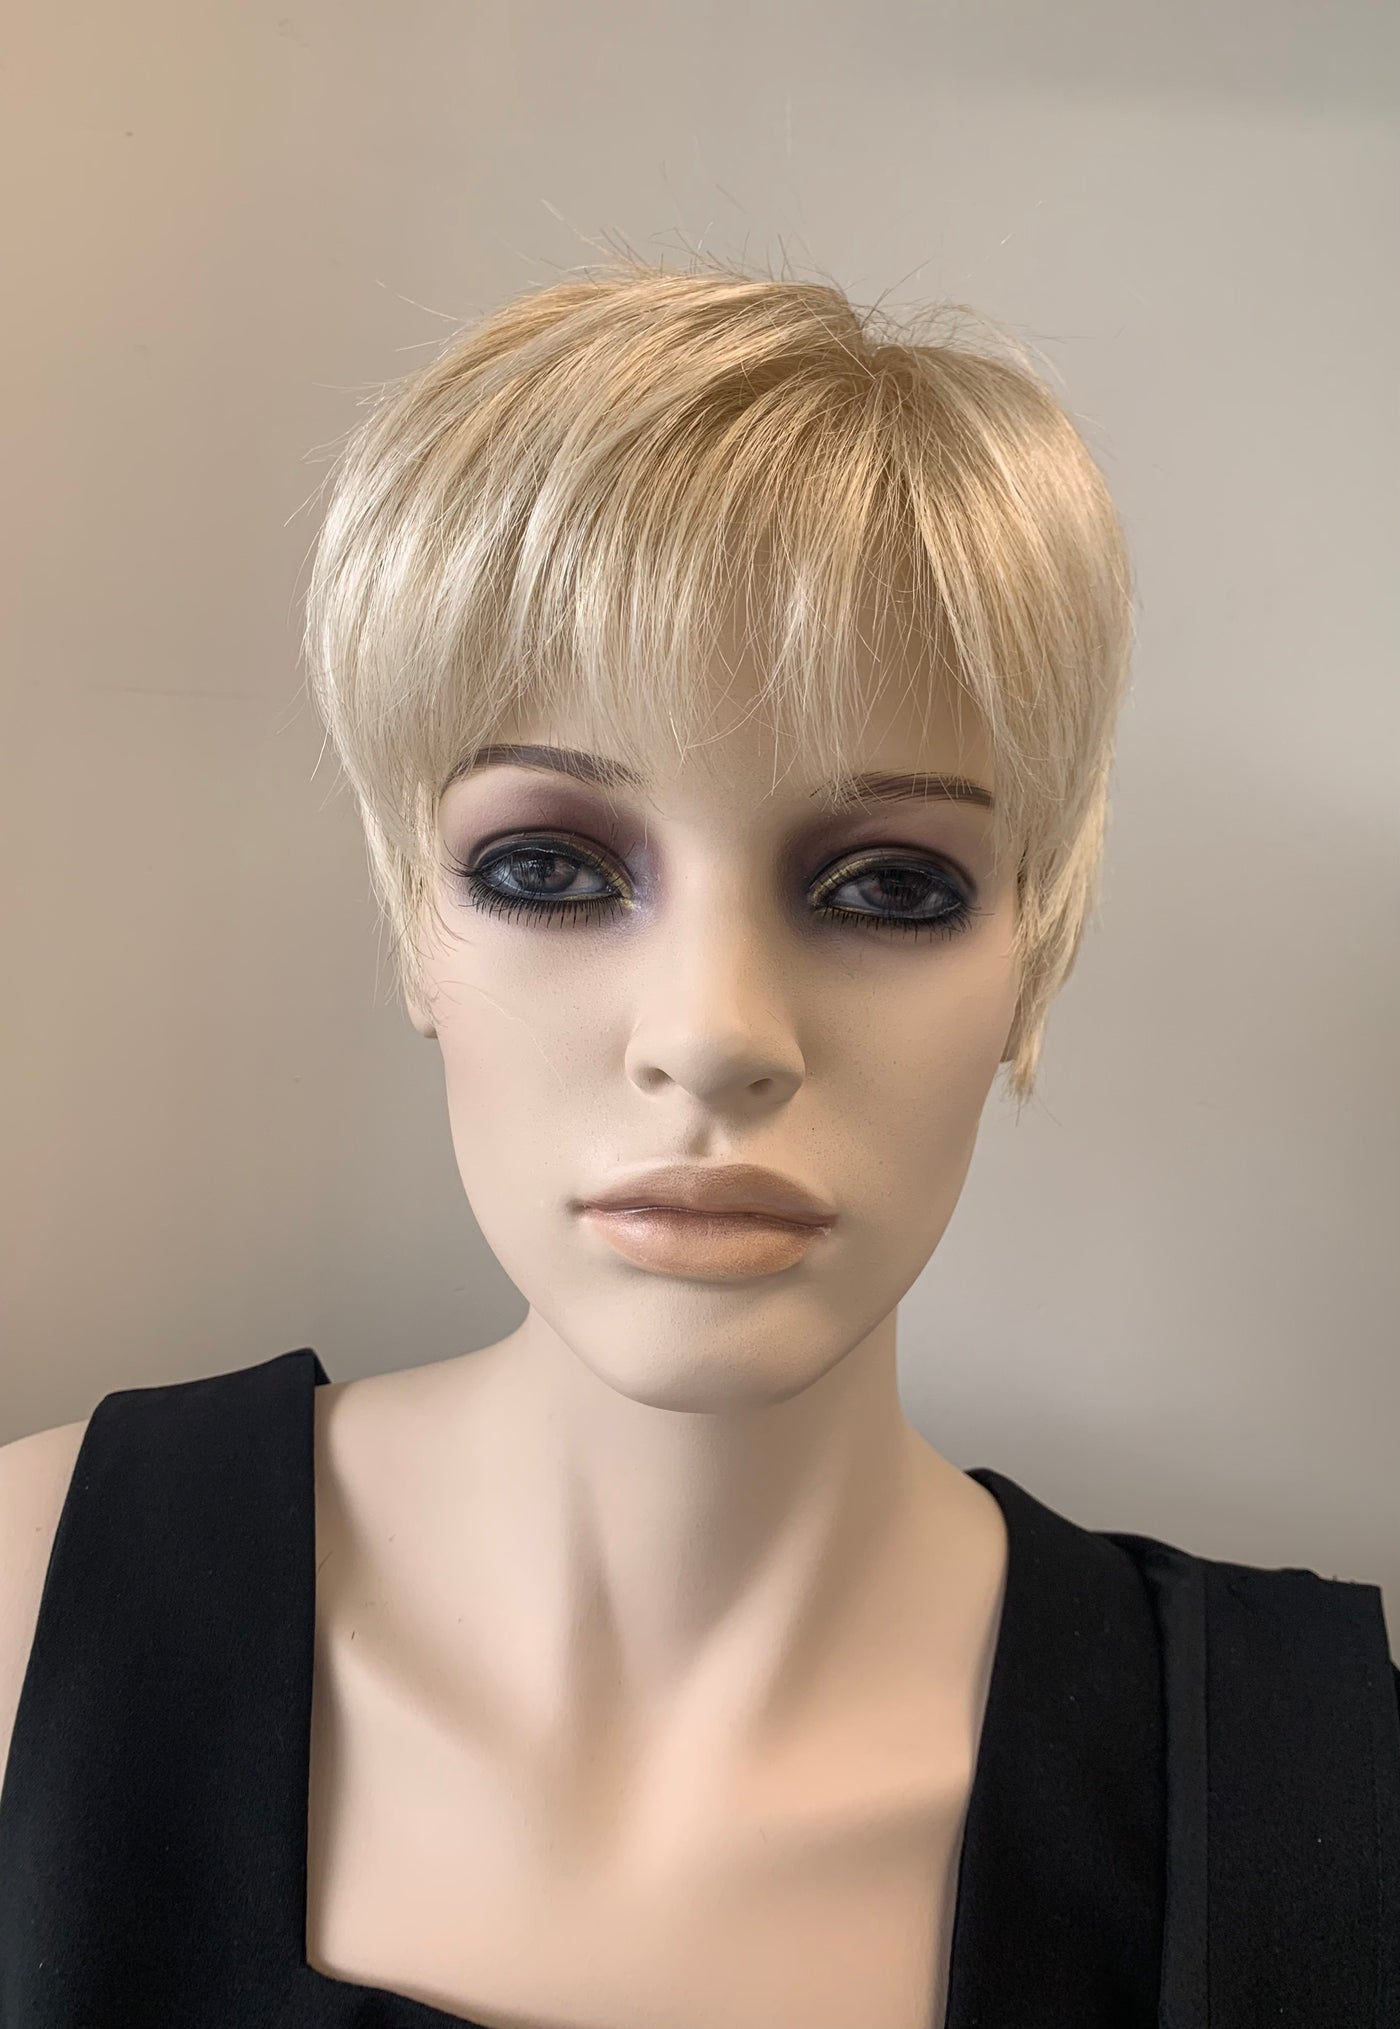 Chris-Synthetic Wig